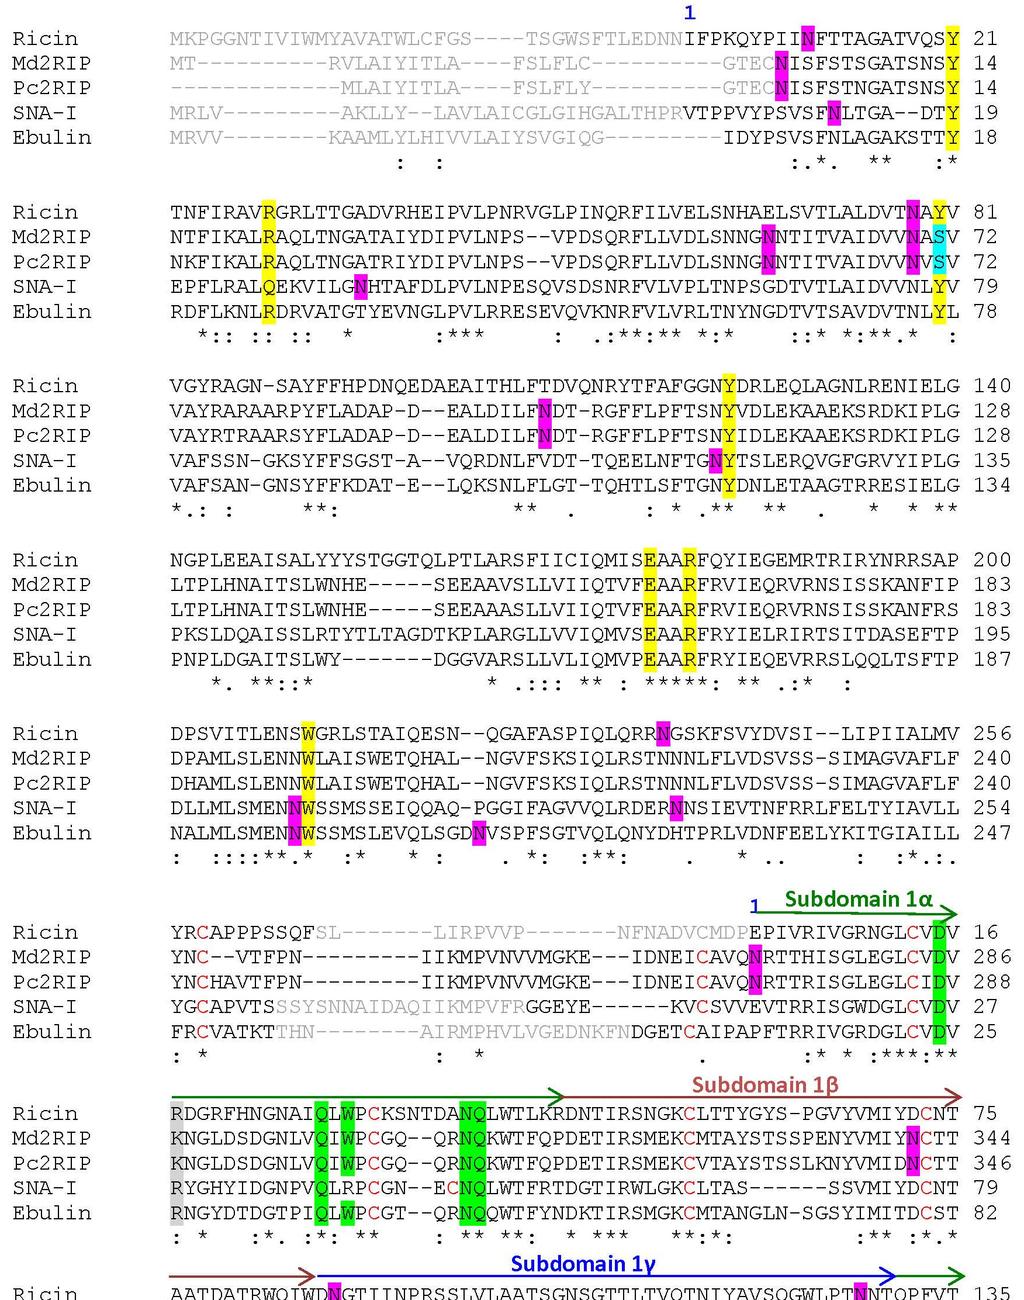 S4 of S10 Figure S3. Sequence alignment of type 2 RIPs from M. domestica (Md2RIP) and P. communis (Pc2RIP), Ricin, Ebulin and SNA-I.